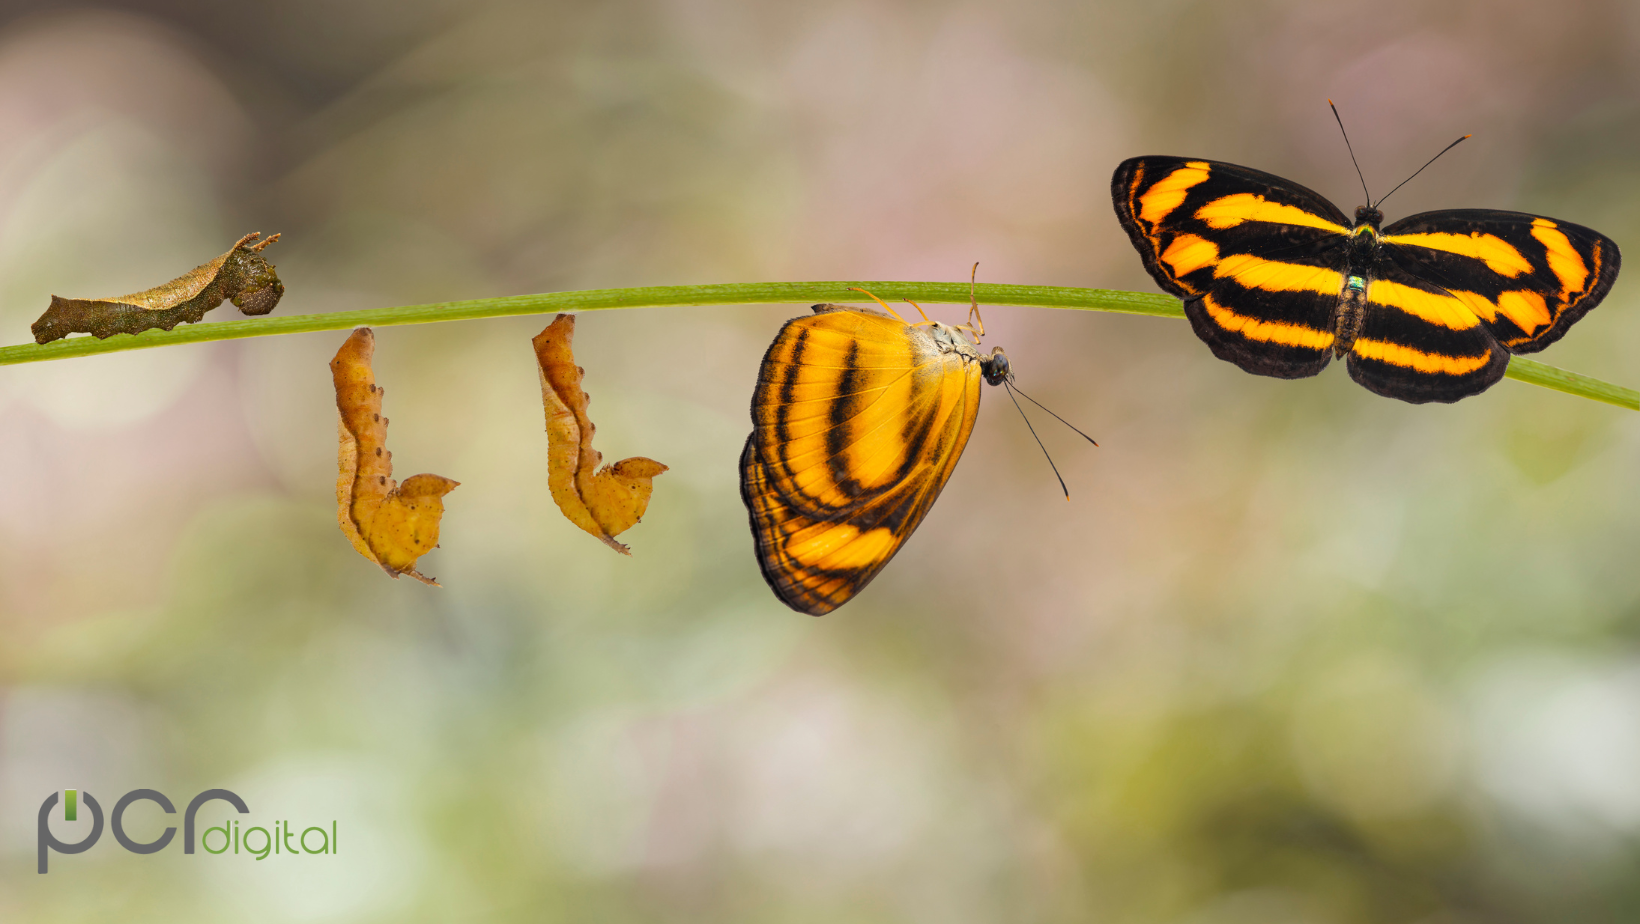 Image of a caterpillar changing into a butterfly